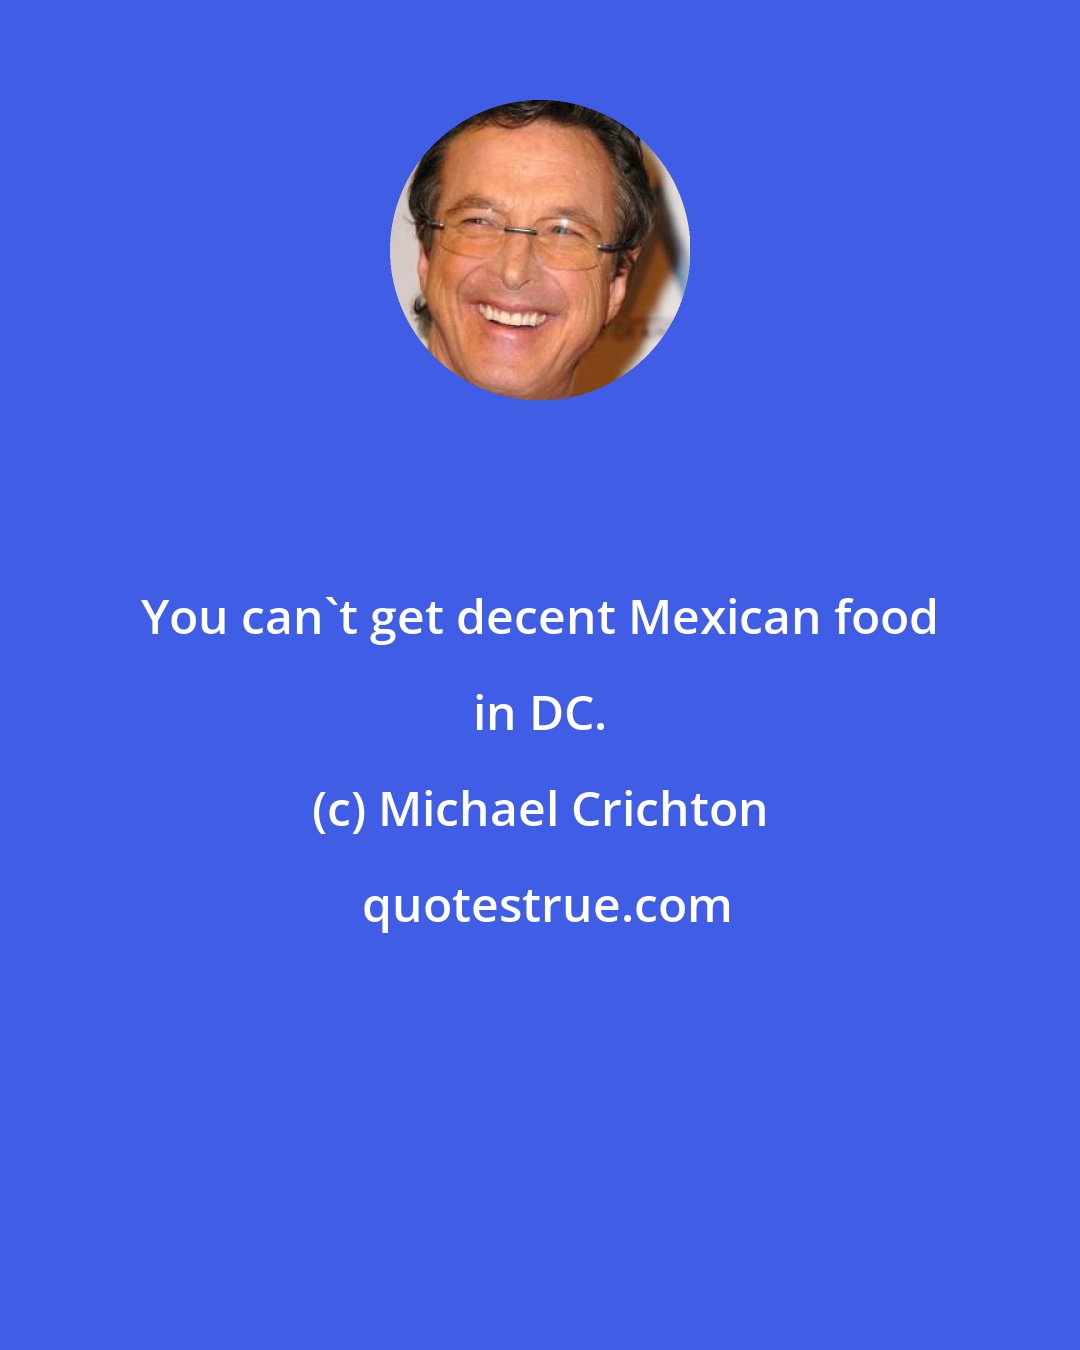 Michael Crichton: You can't get decent Mexican food in DC.